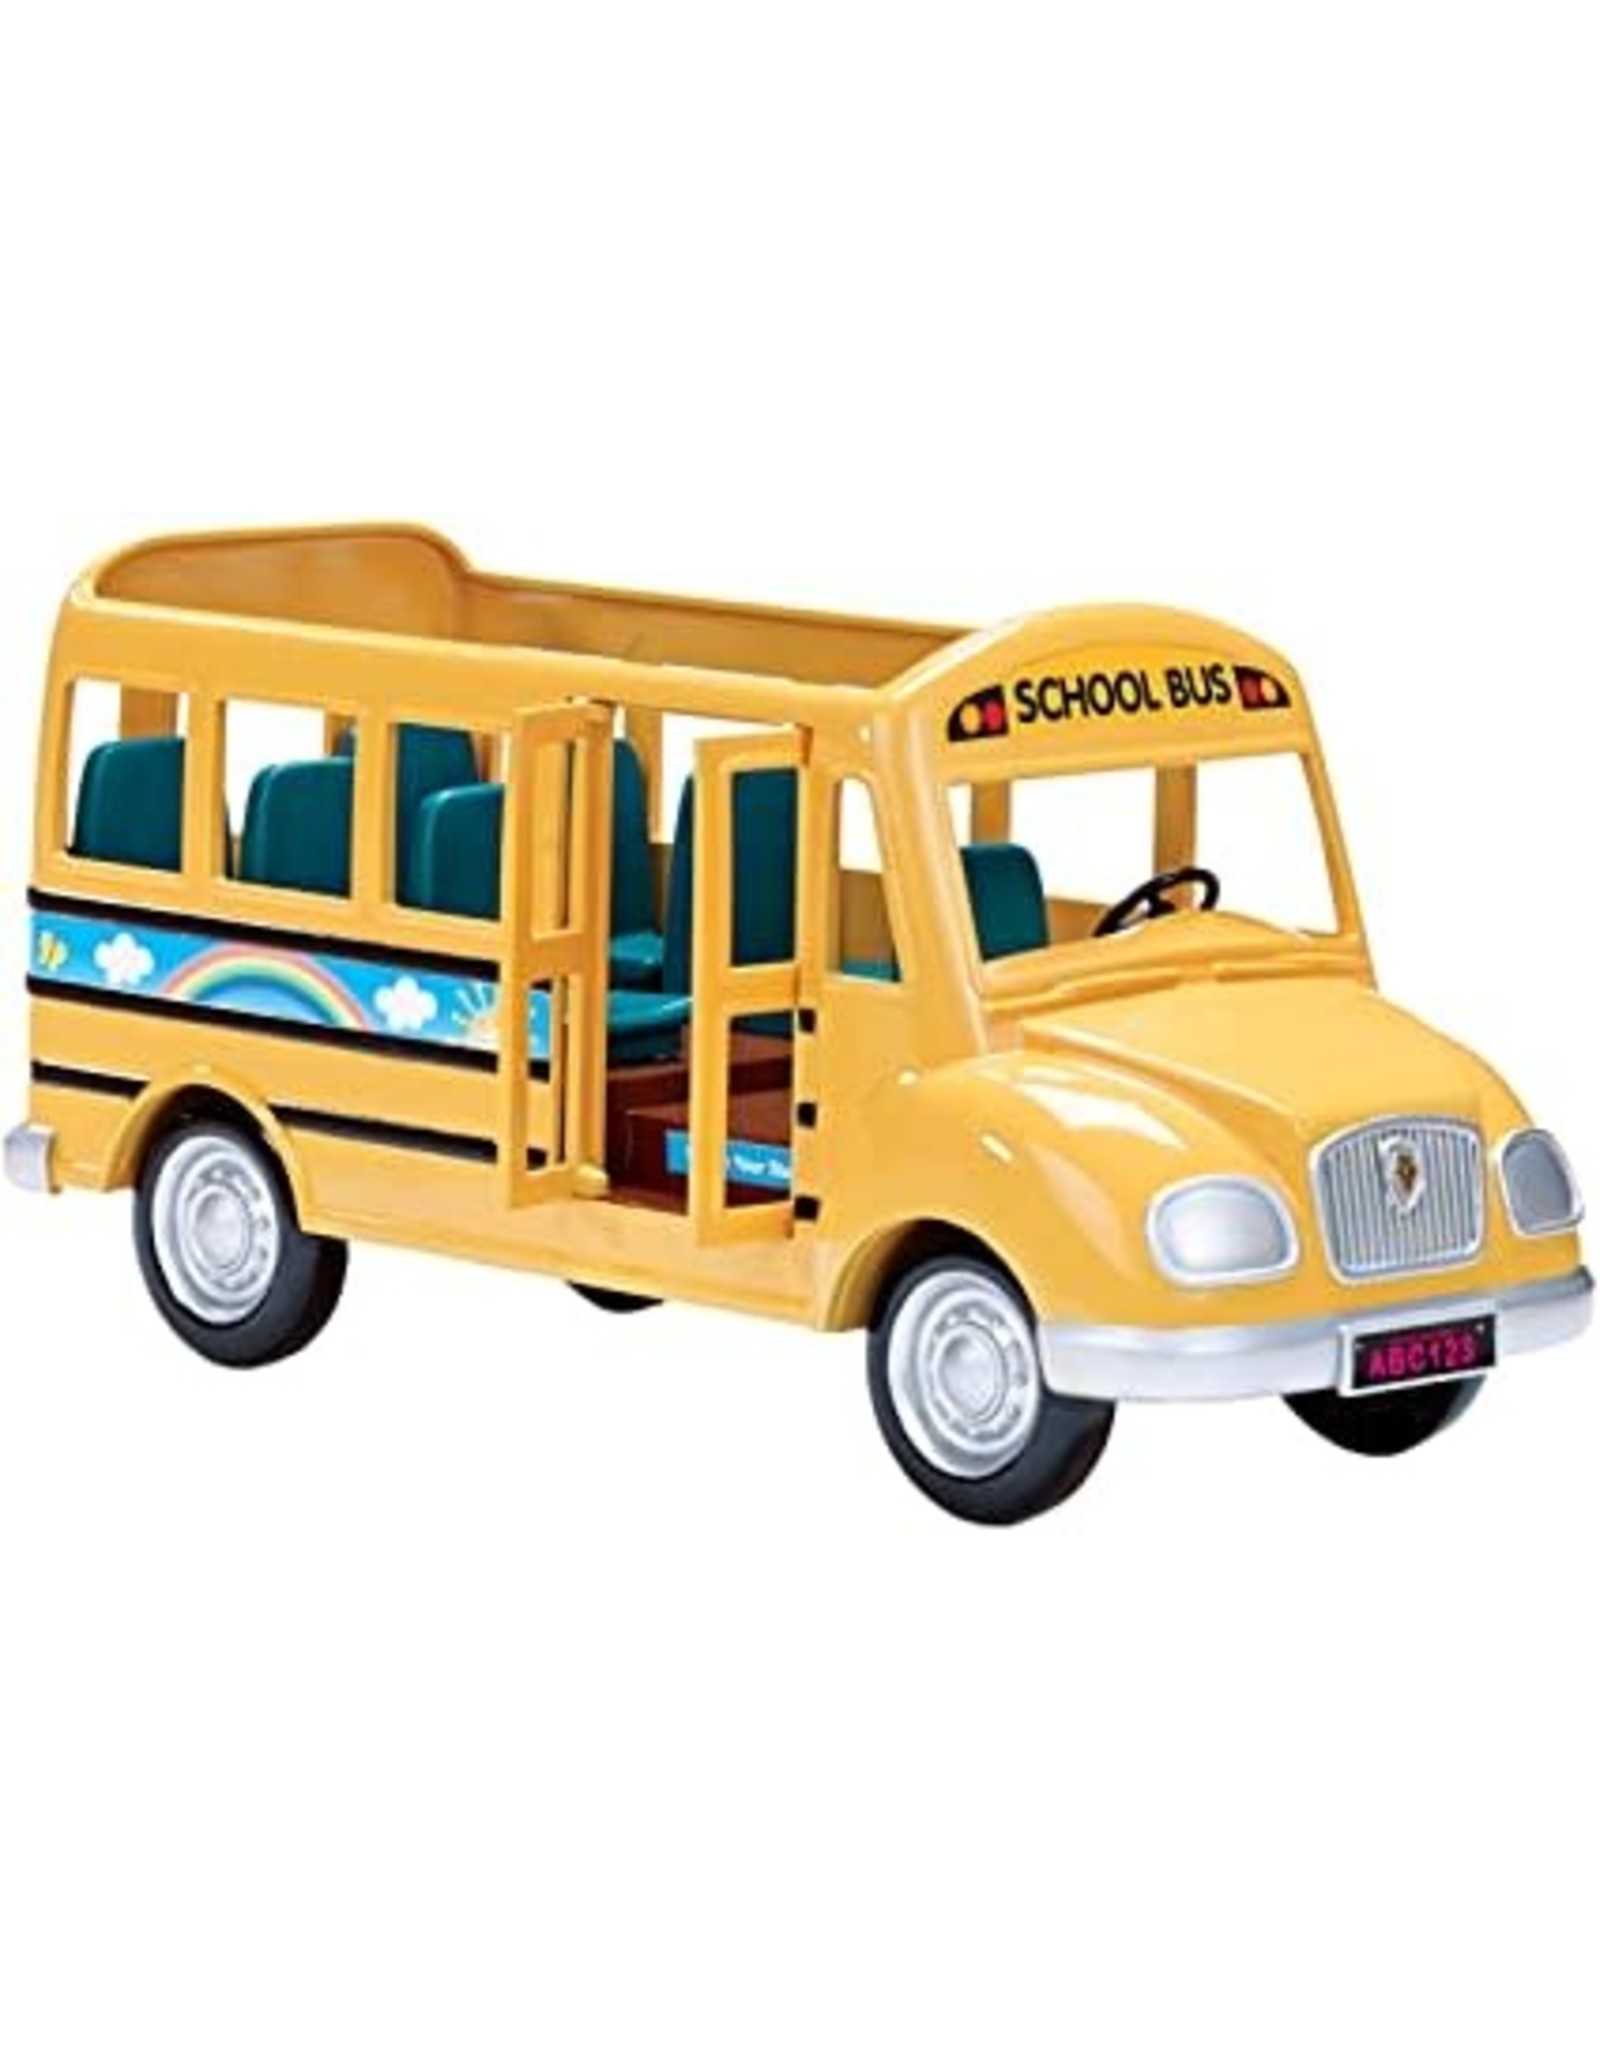 Calico Critters Calico Critters School Bus